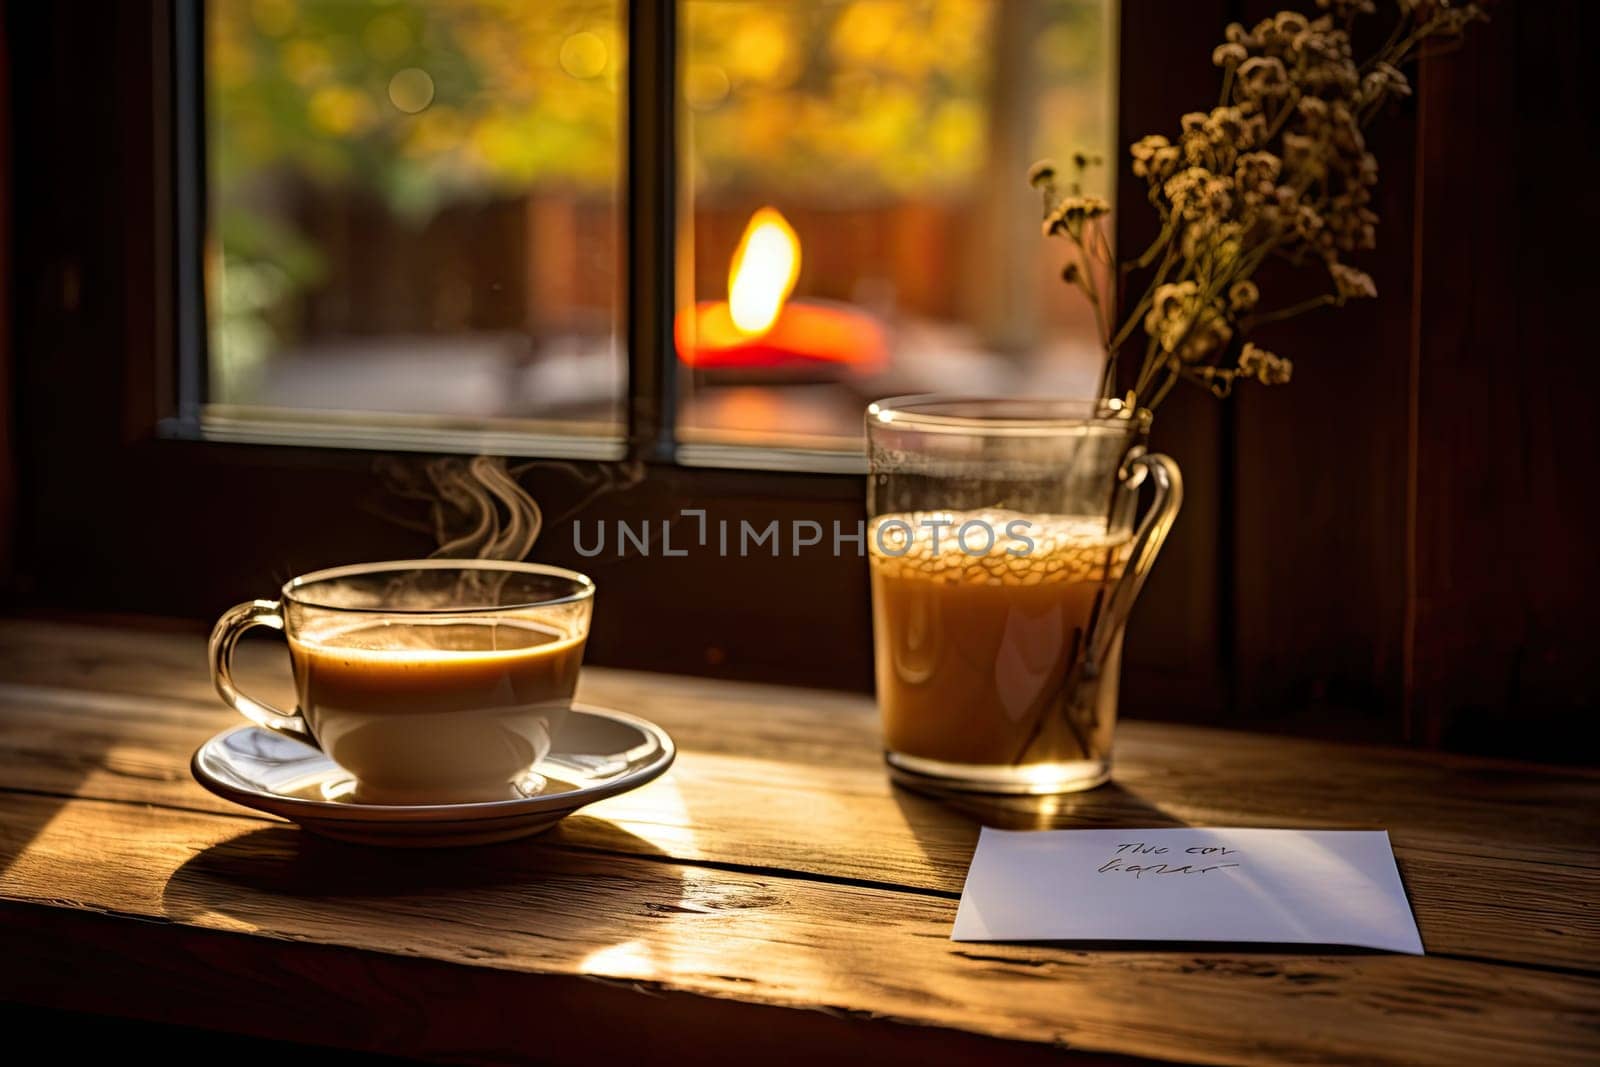 a cup and saucer on a table next to a window with the sun shining in the windows behind it